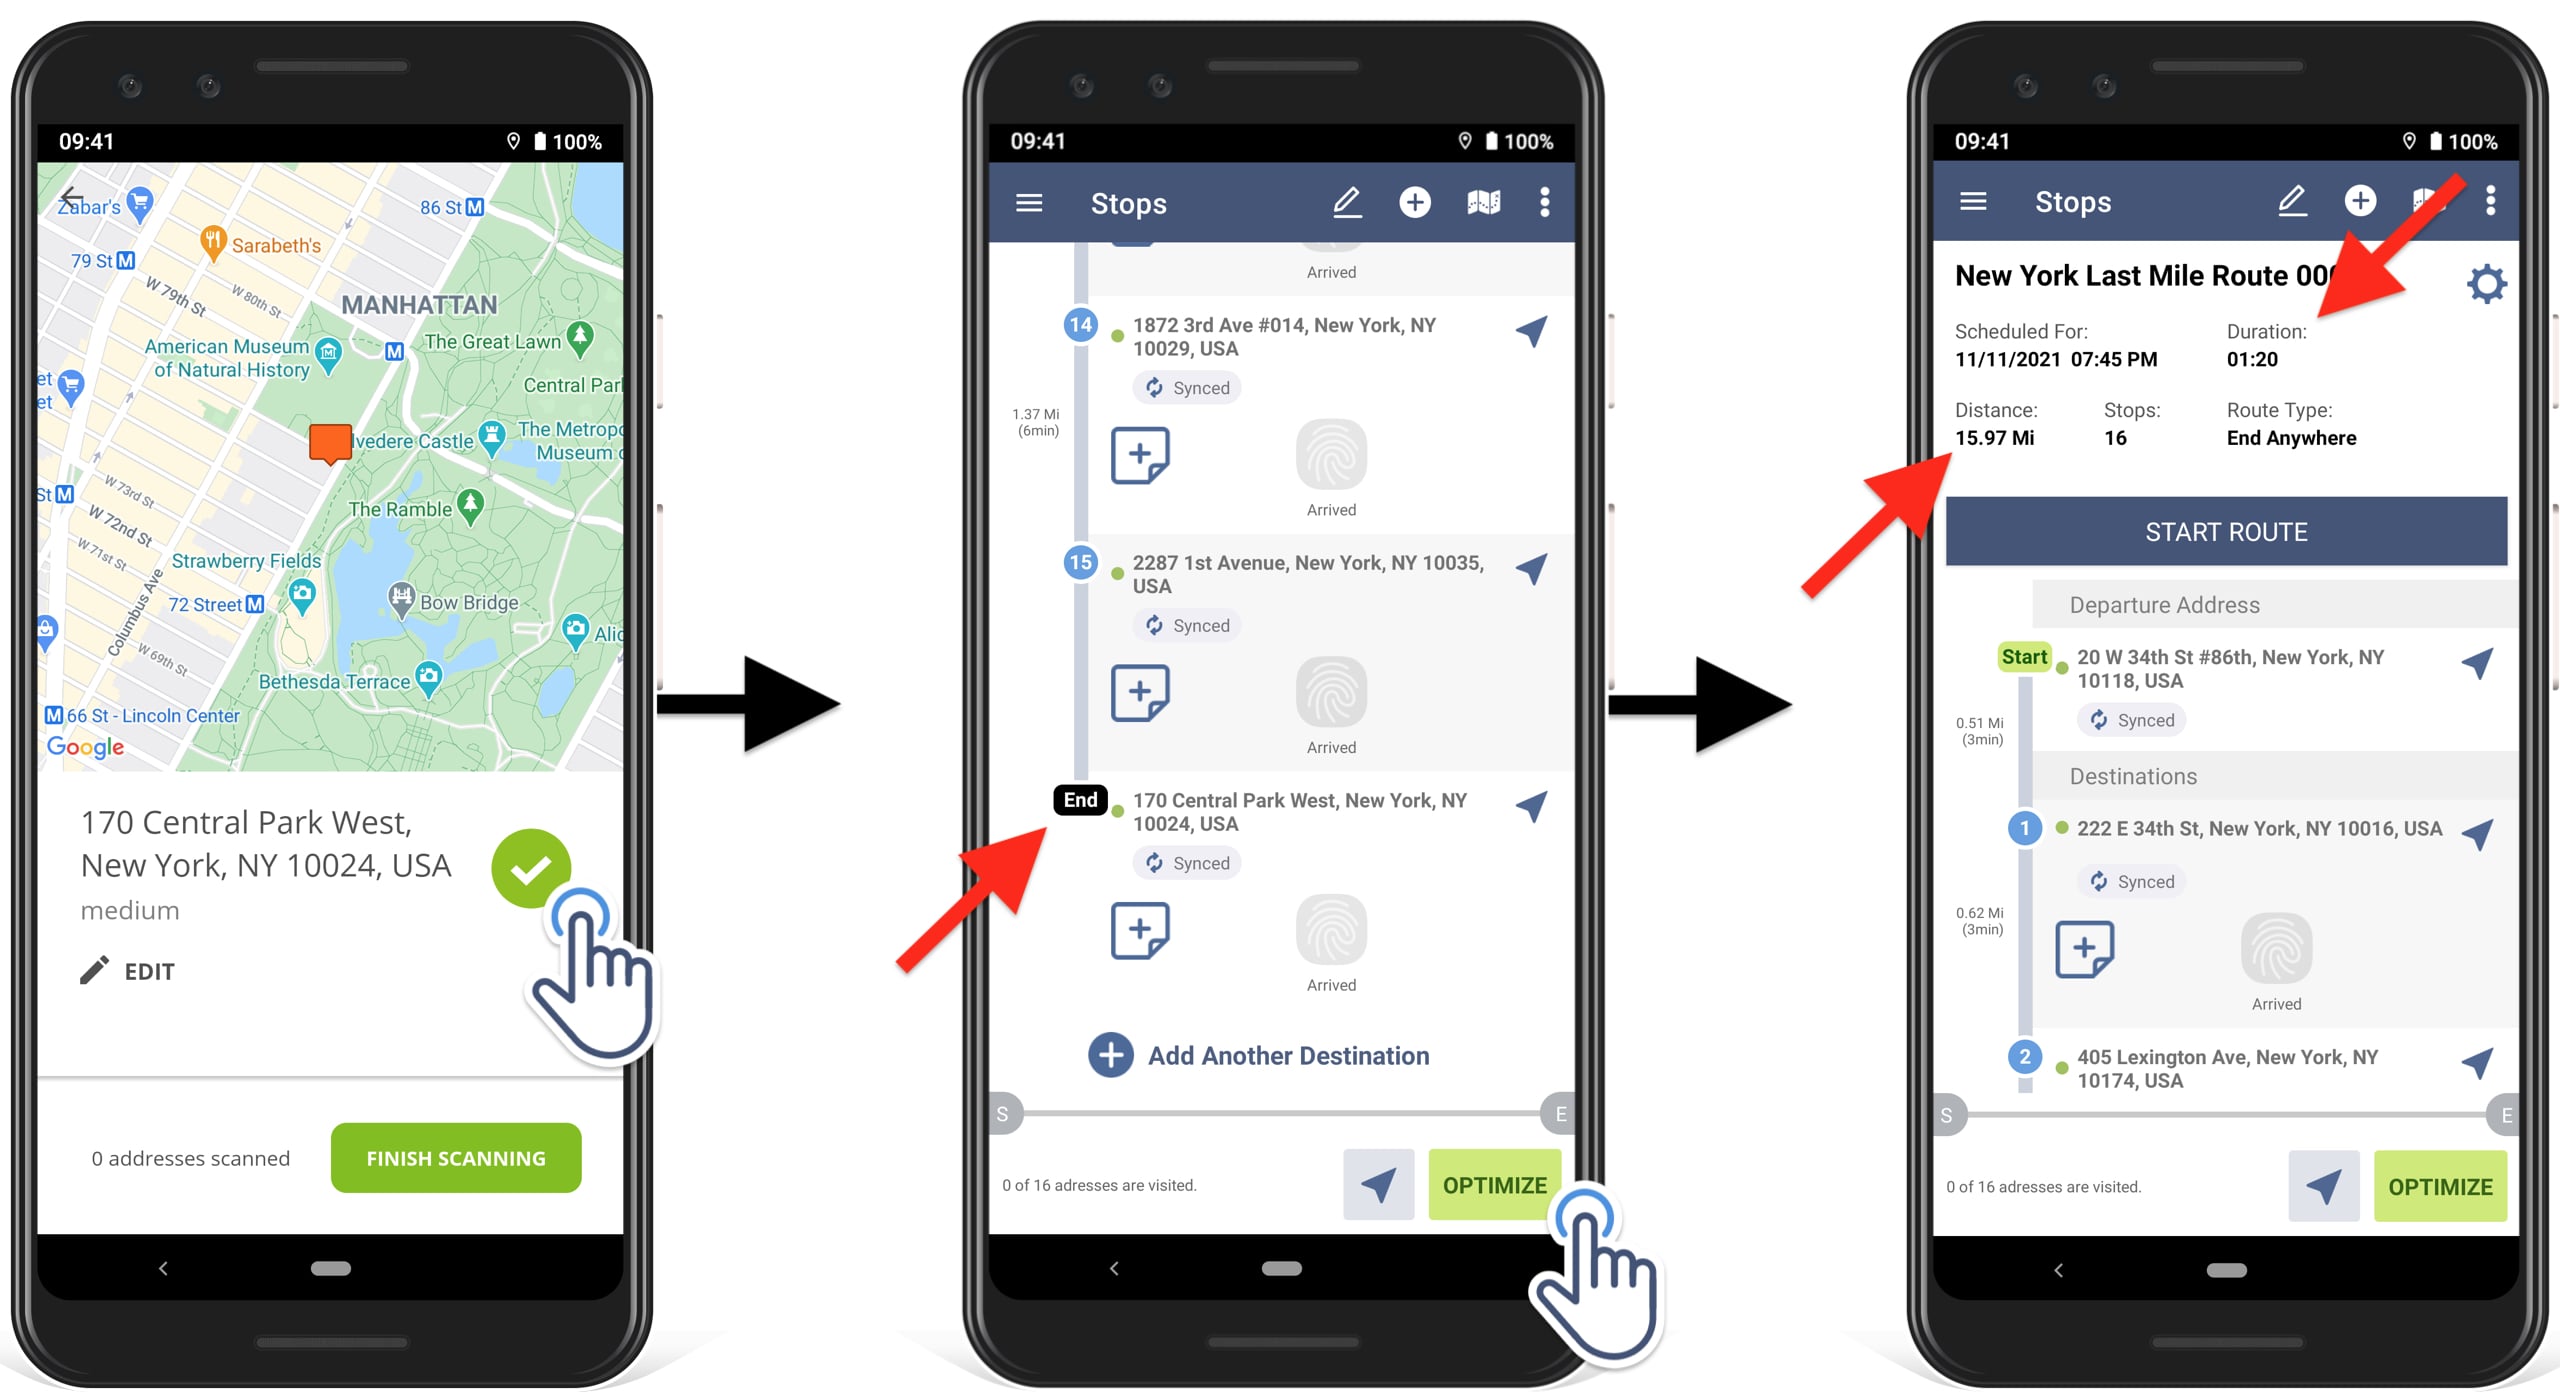 Scan to add new addresses into a planned route and re-optimize the route with new scanned addresses.